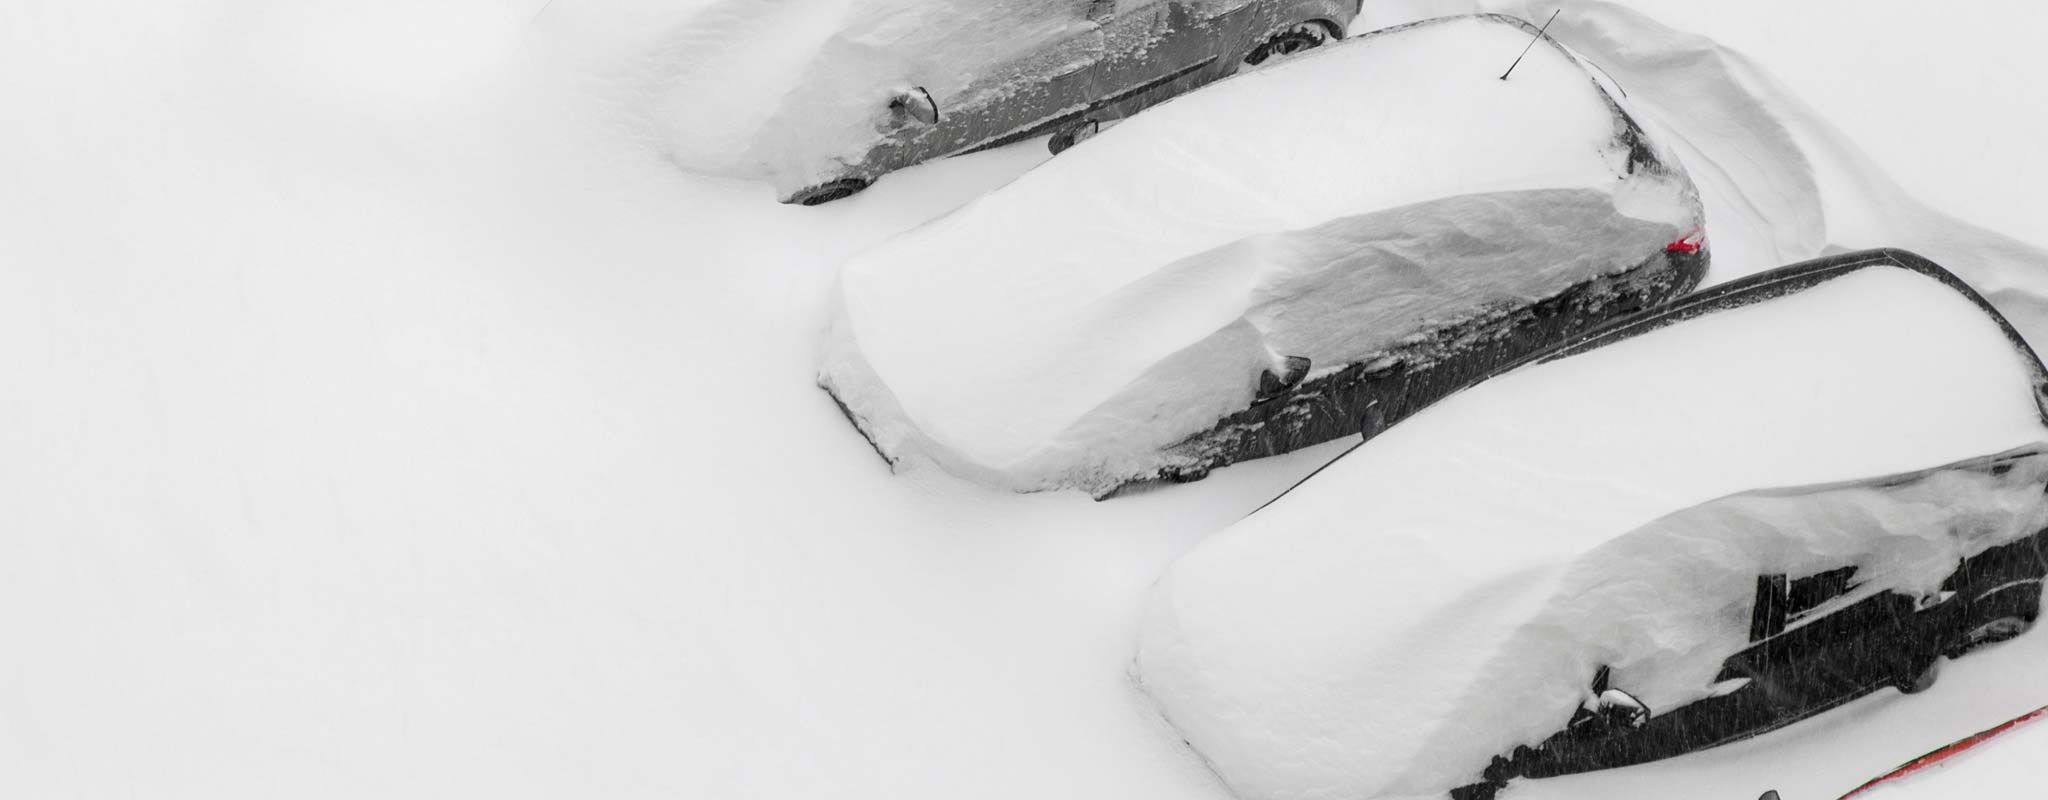 Cars buried under a large snowfall.